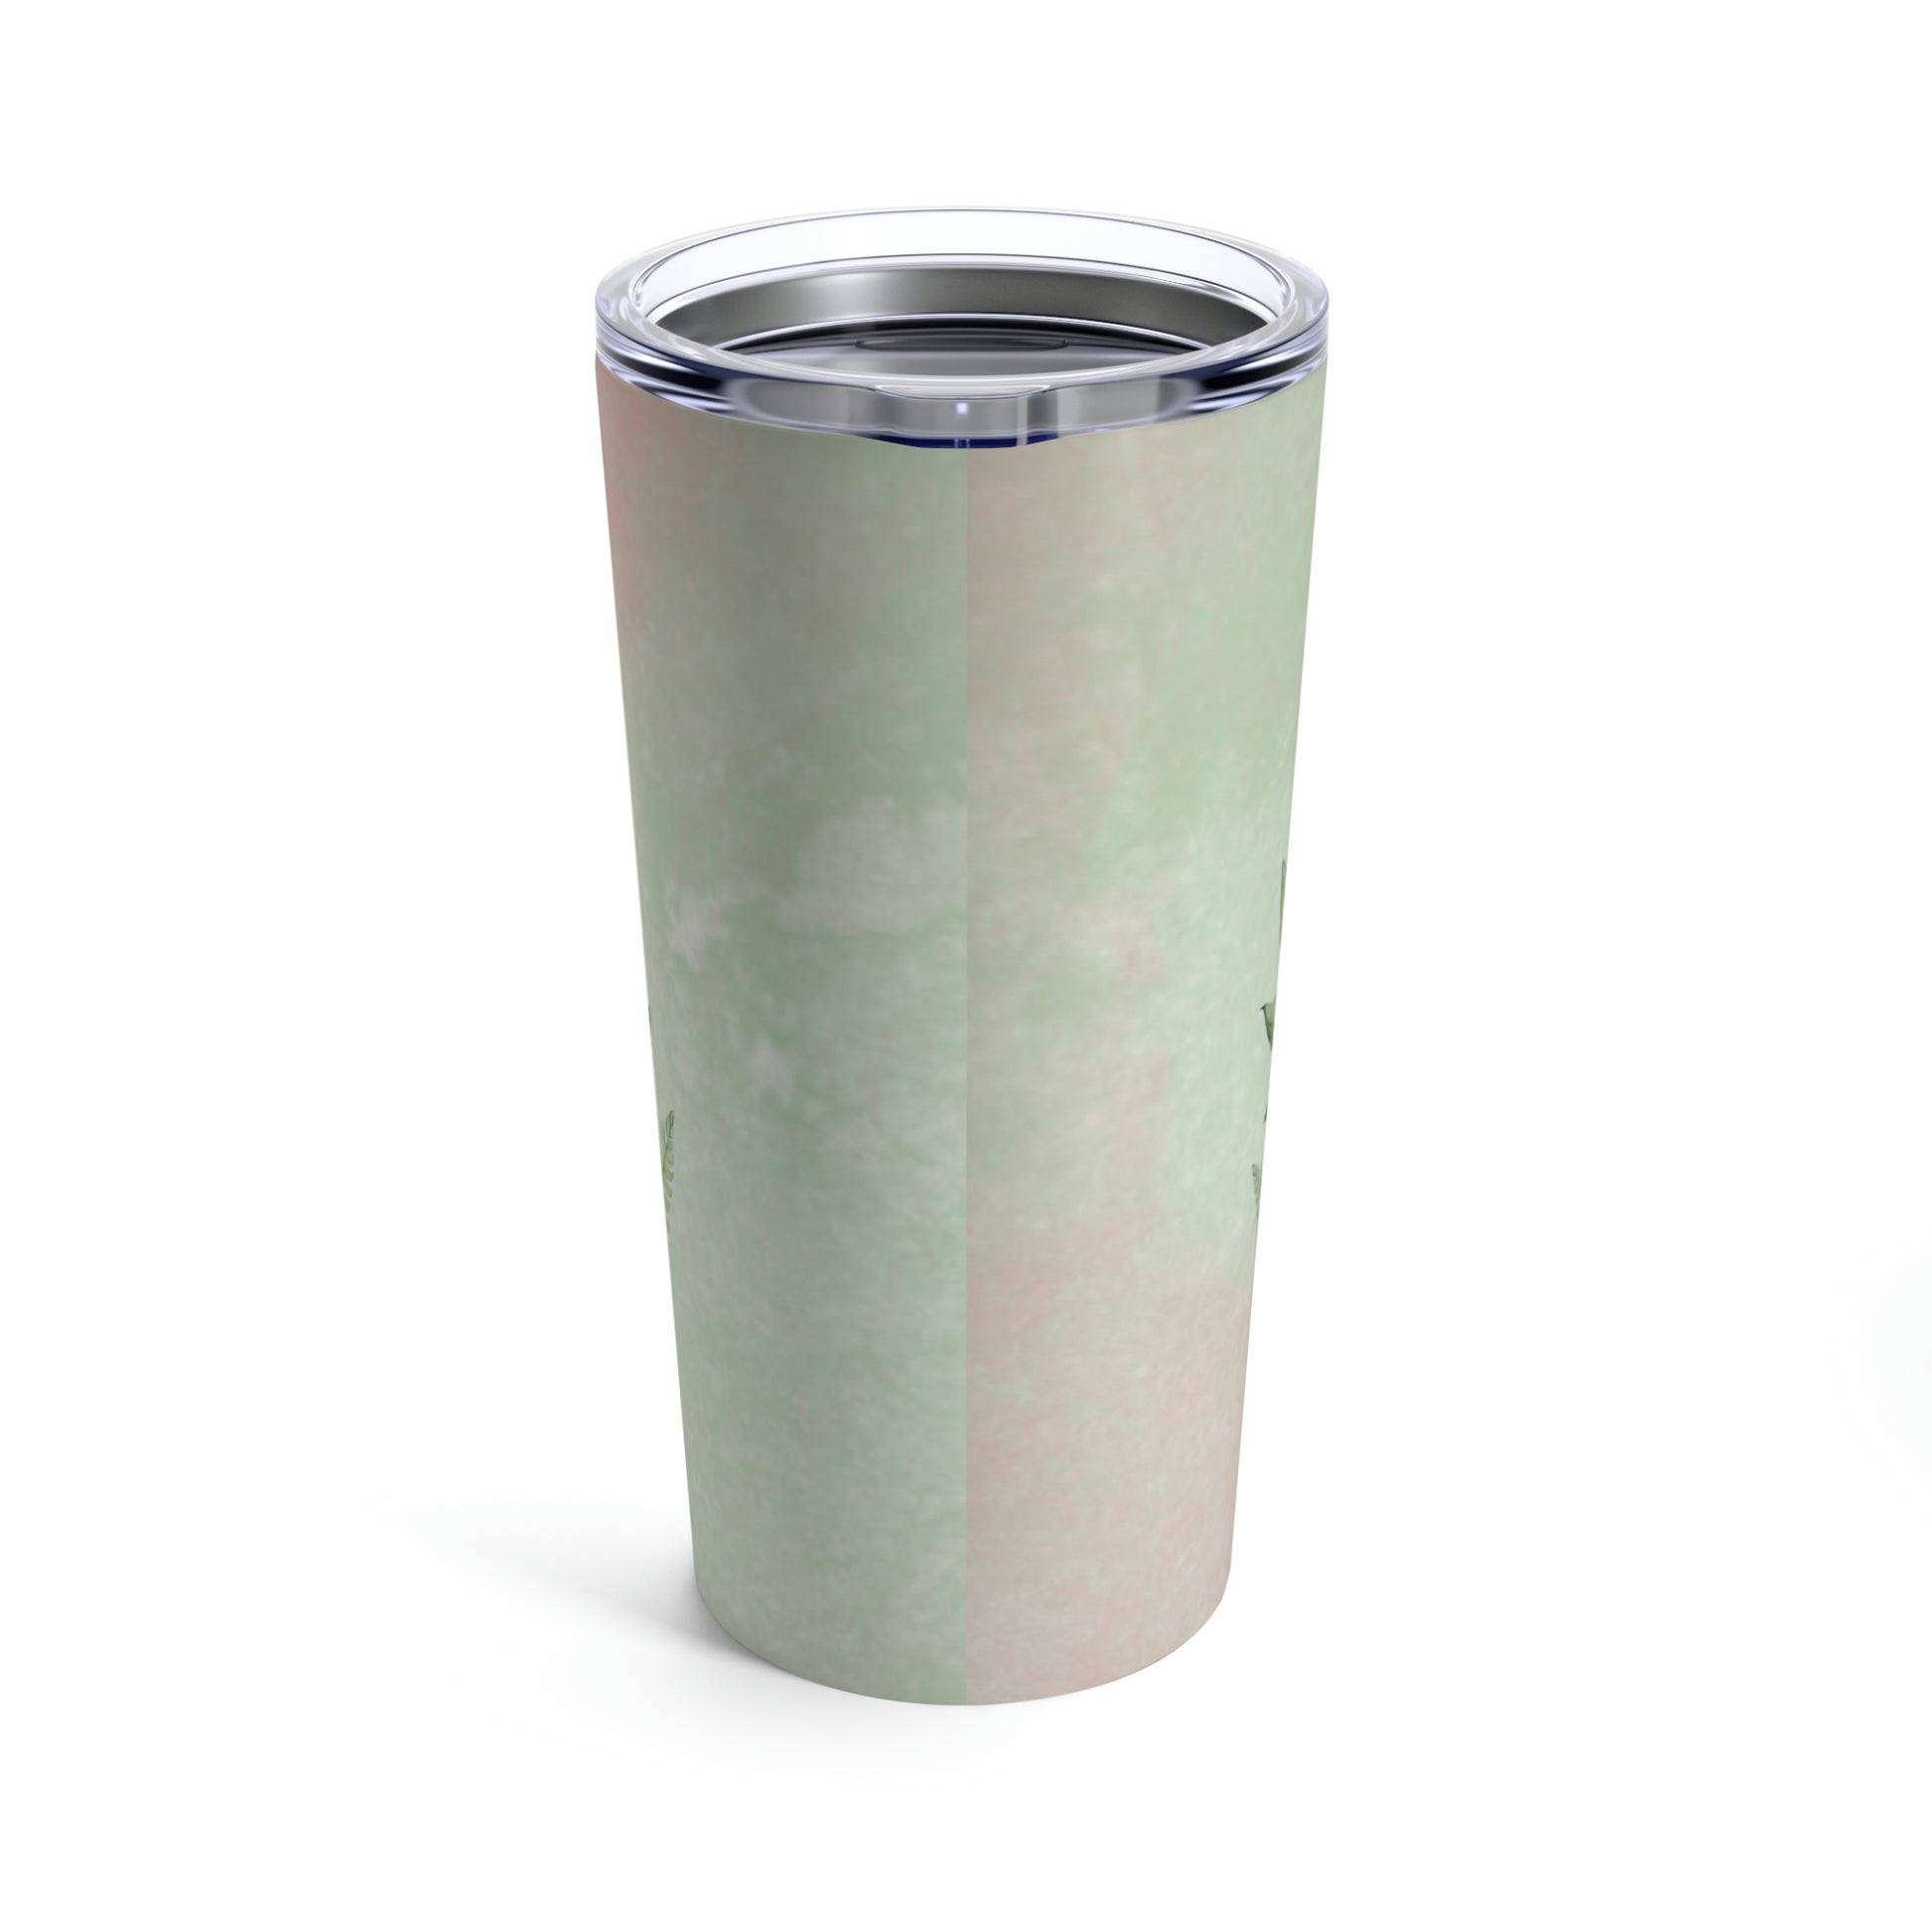 Pink Crystal on Green Leaves Watercolor Tumbler 20oz